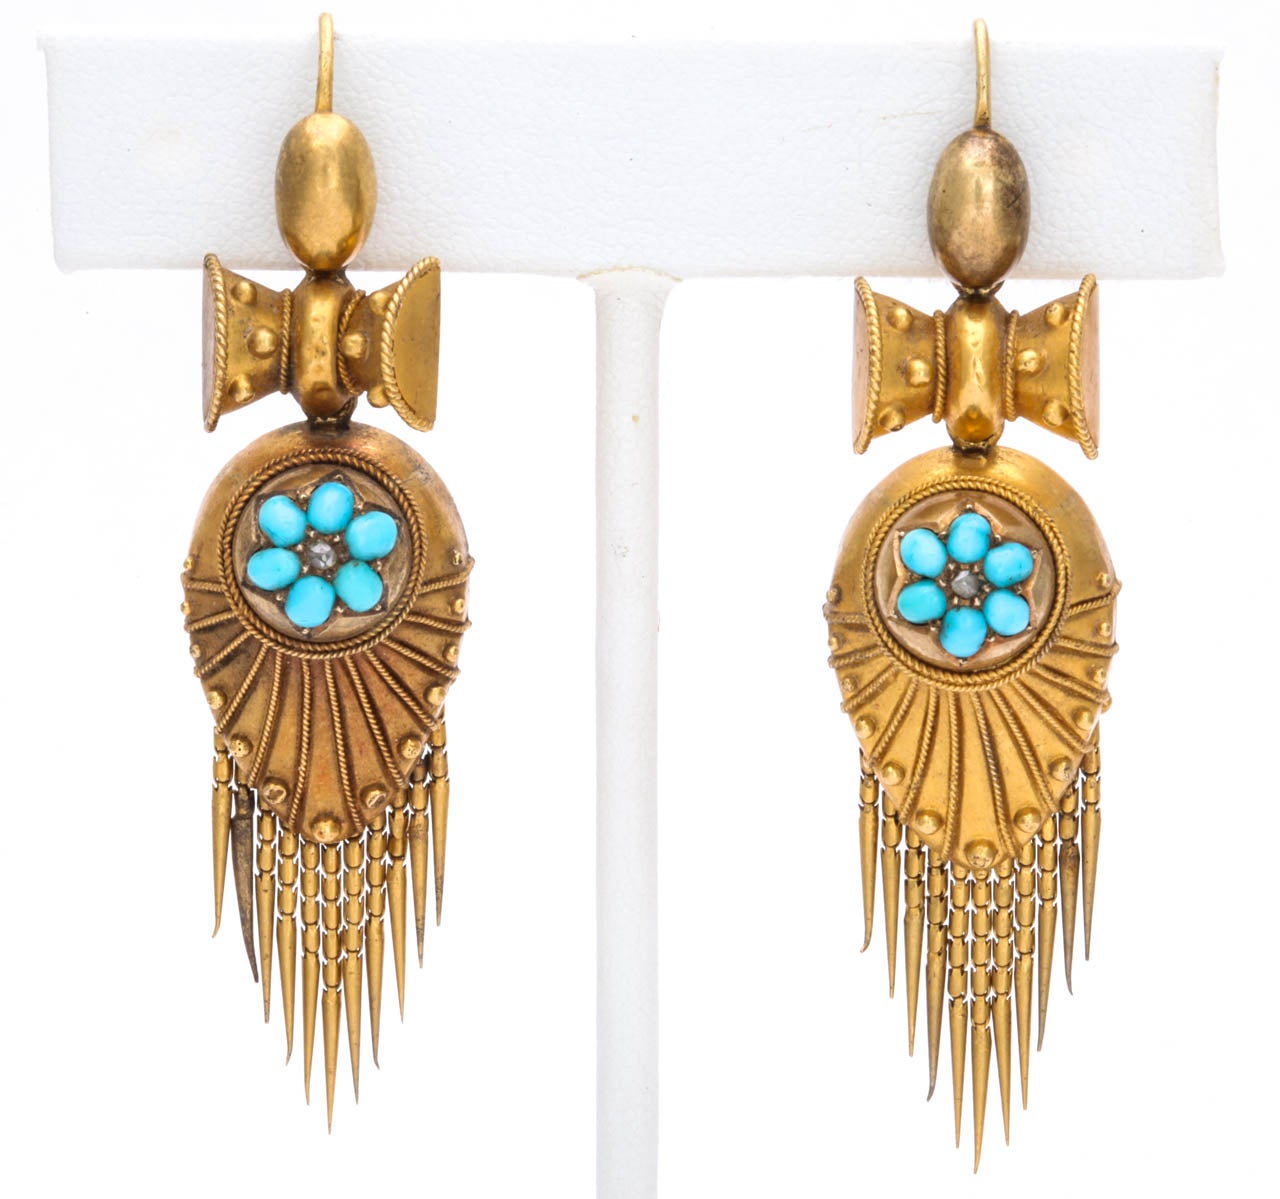 The elements of Victoriana  make their appearance in this pair of substantial chandelier earrings. Articulated fringe gives movement to the jewels dressing them in feminine grace. Interest abounds with the addition of applied gold wire and small